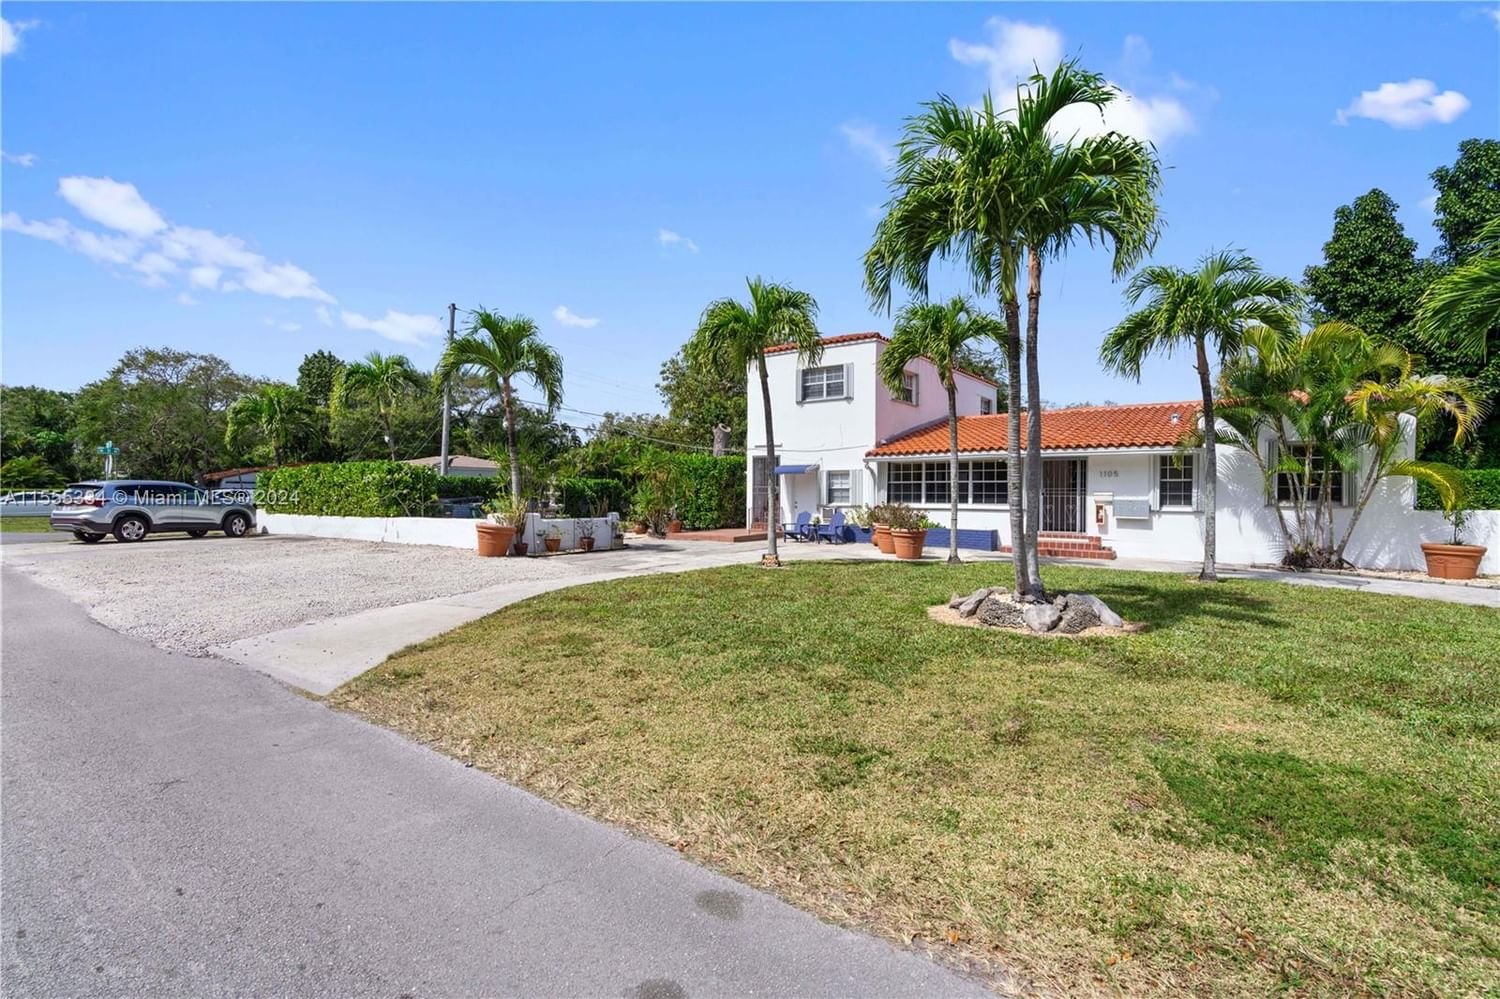 Real estate property located at 1105 119th St, Miami-Dade County, REV PALOMAR, Biscayne Park, FL